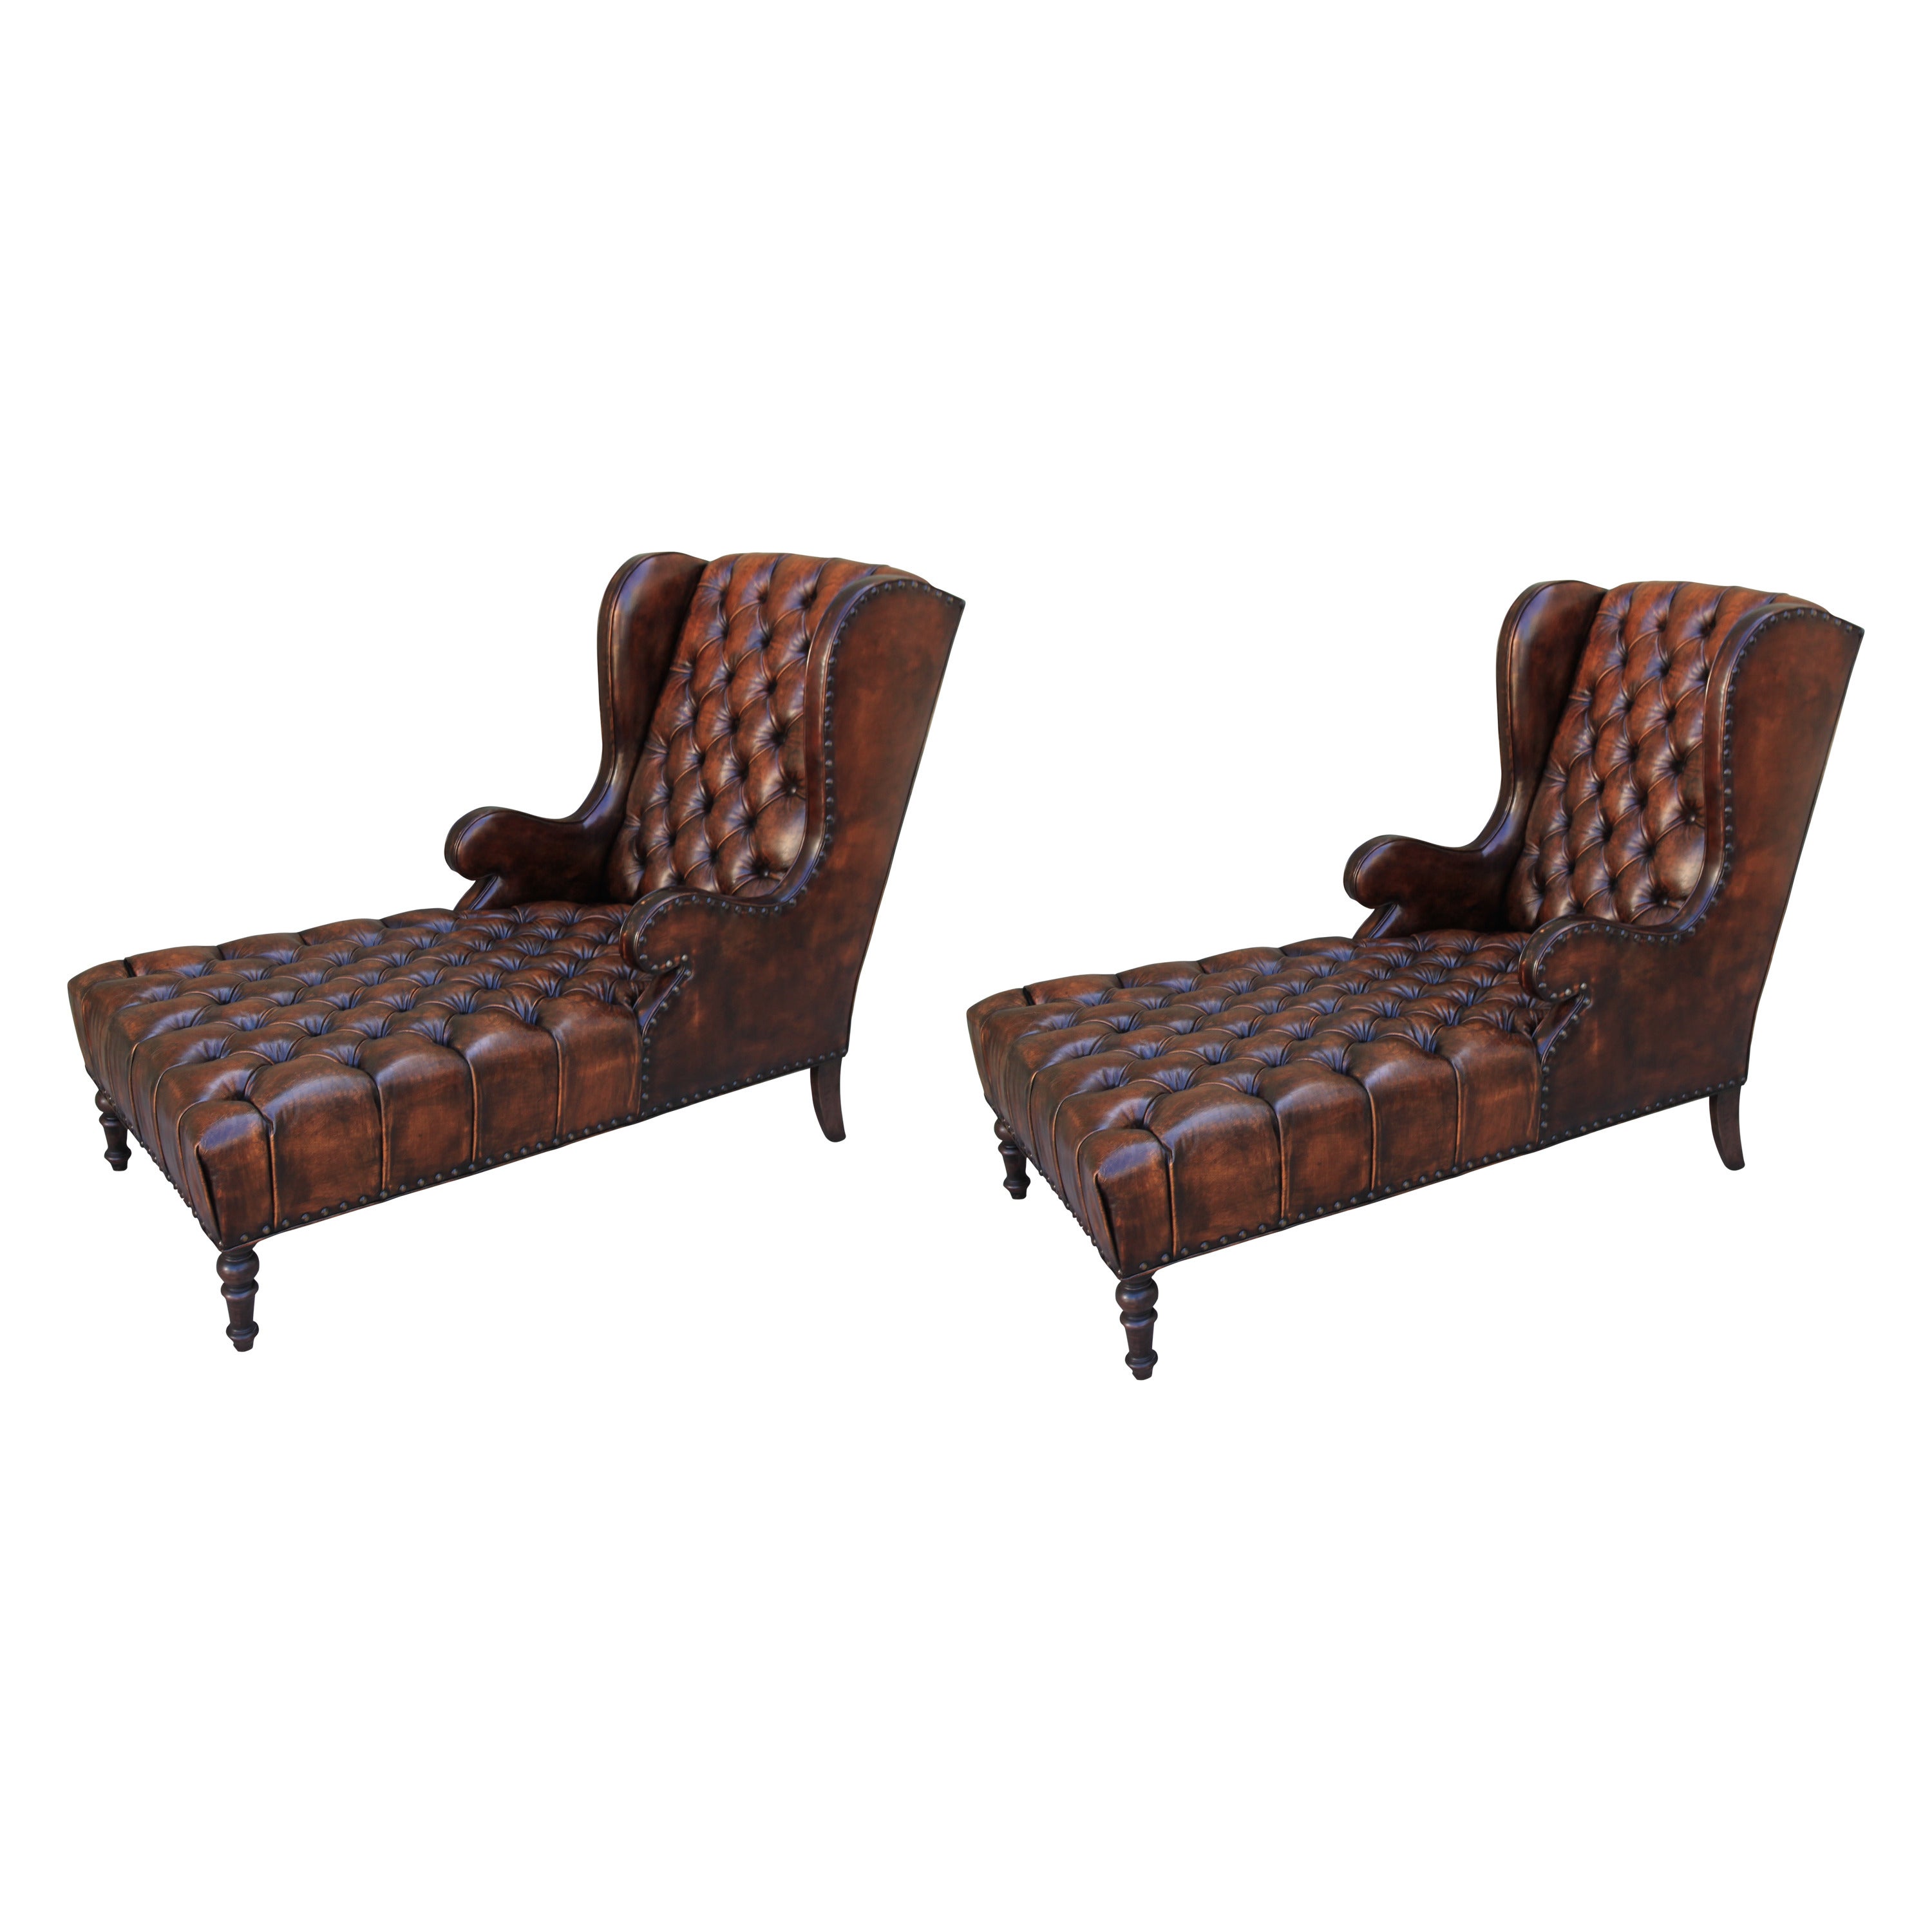 Pair of Leather Tufted Chaises with Nailheads